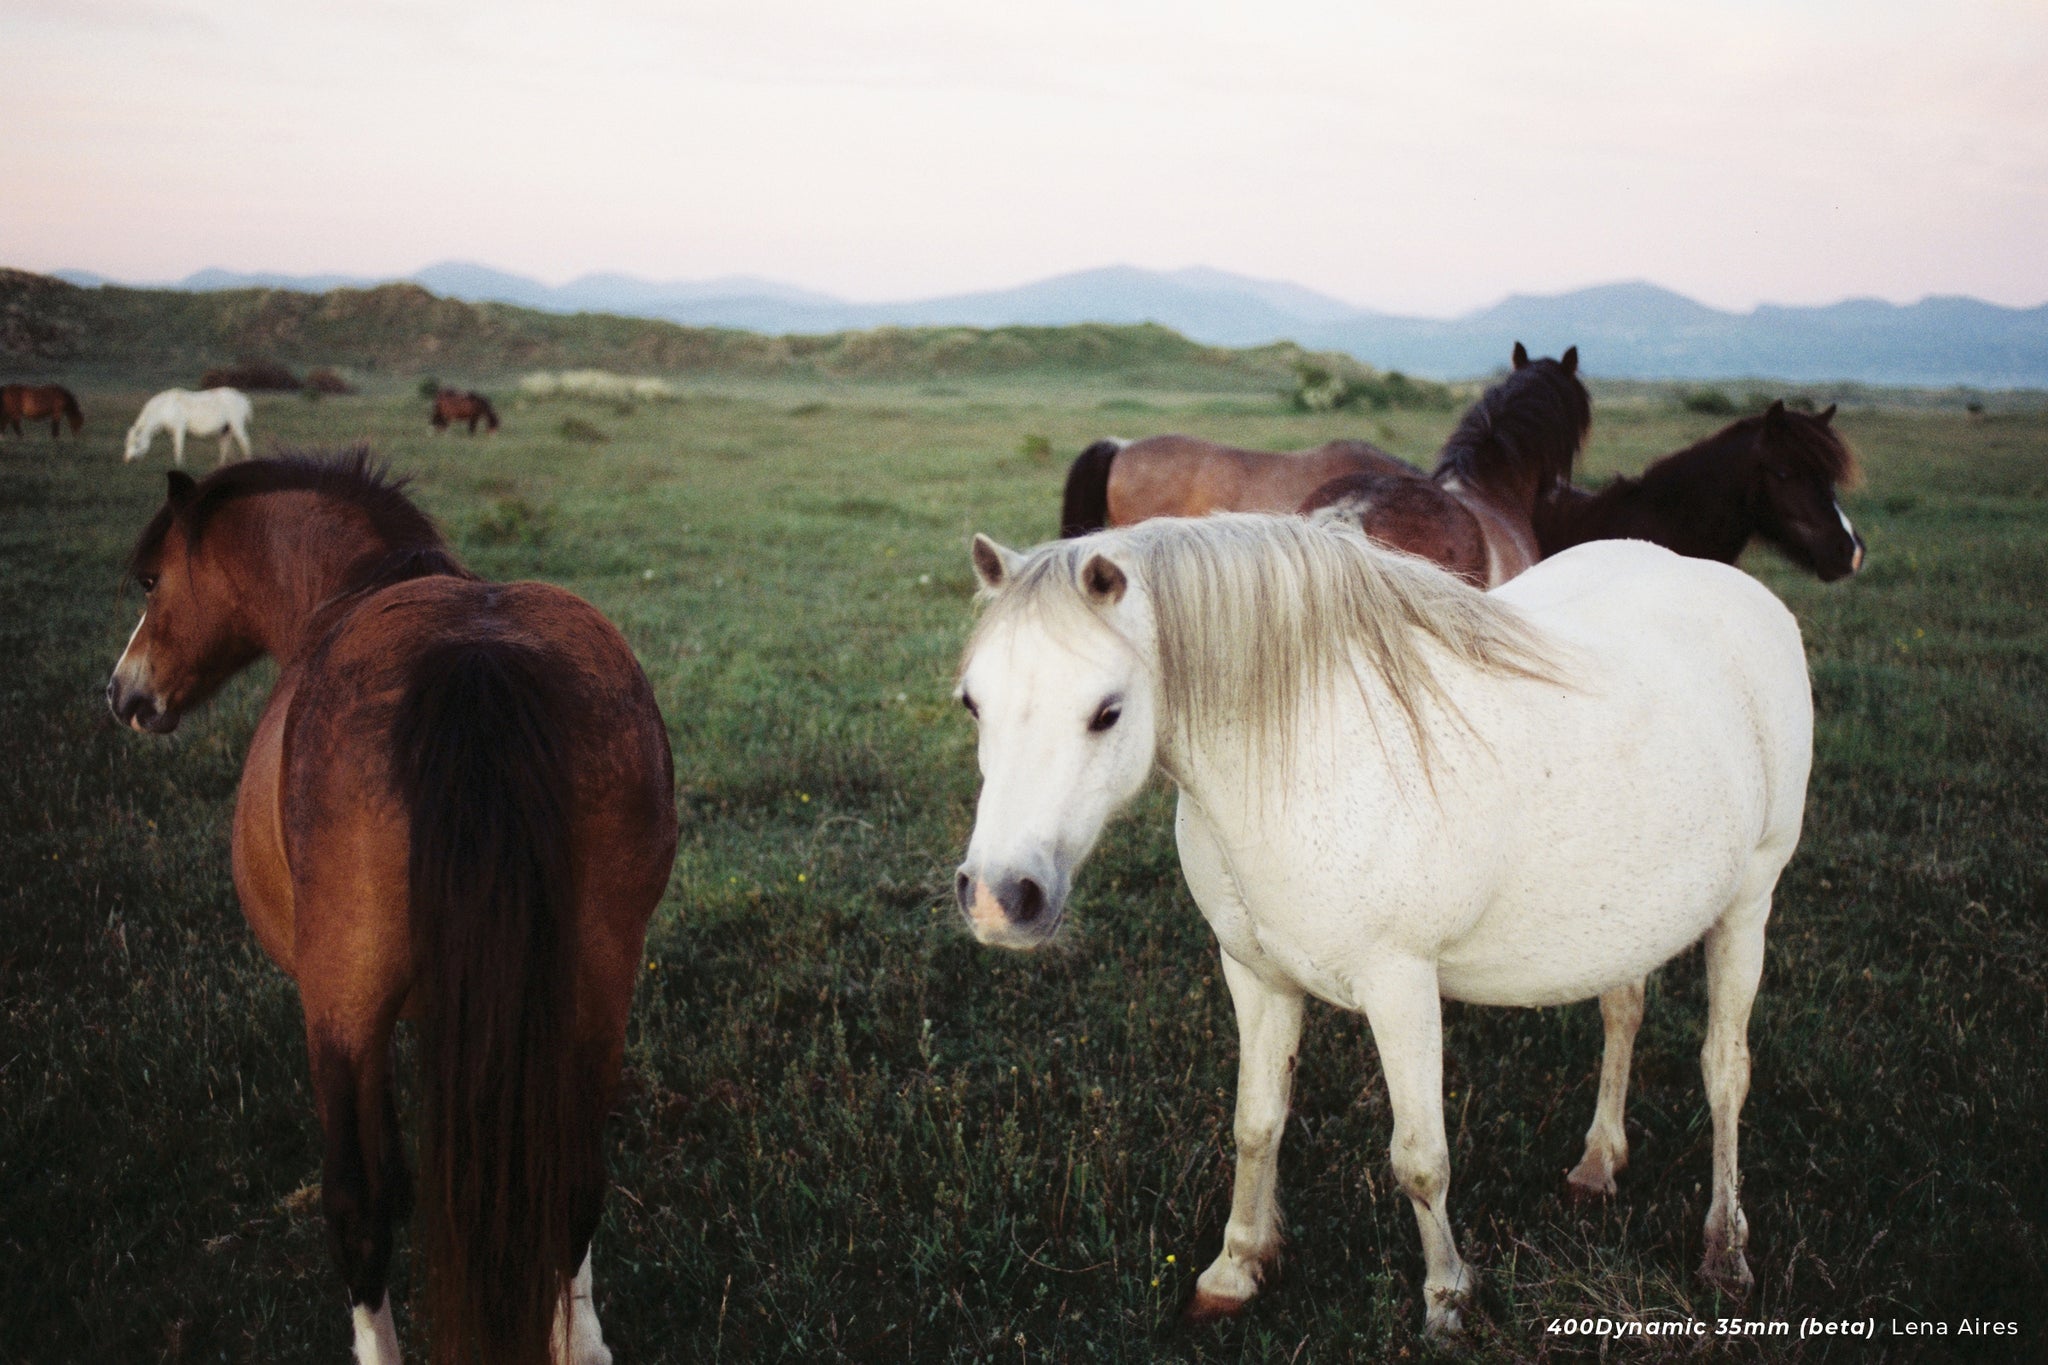 A sample photo shot with CineStill 400D of two horses, one white one brown, in a foggy field.